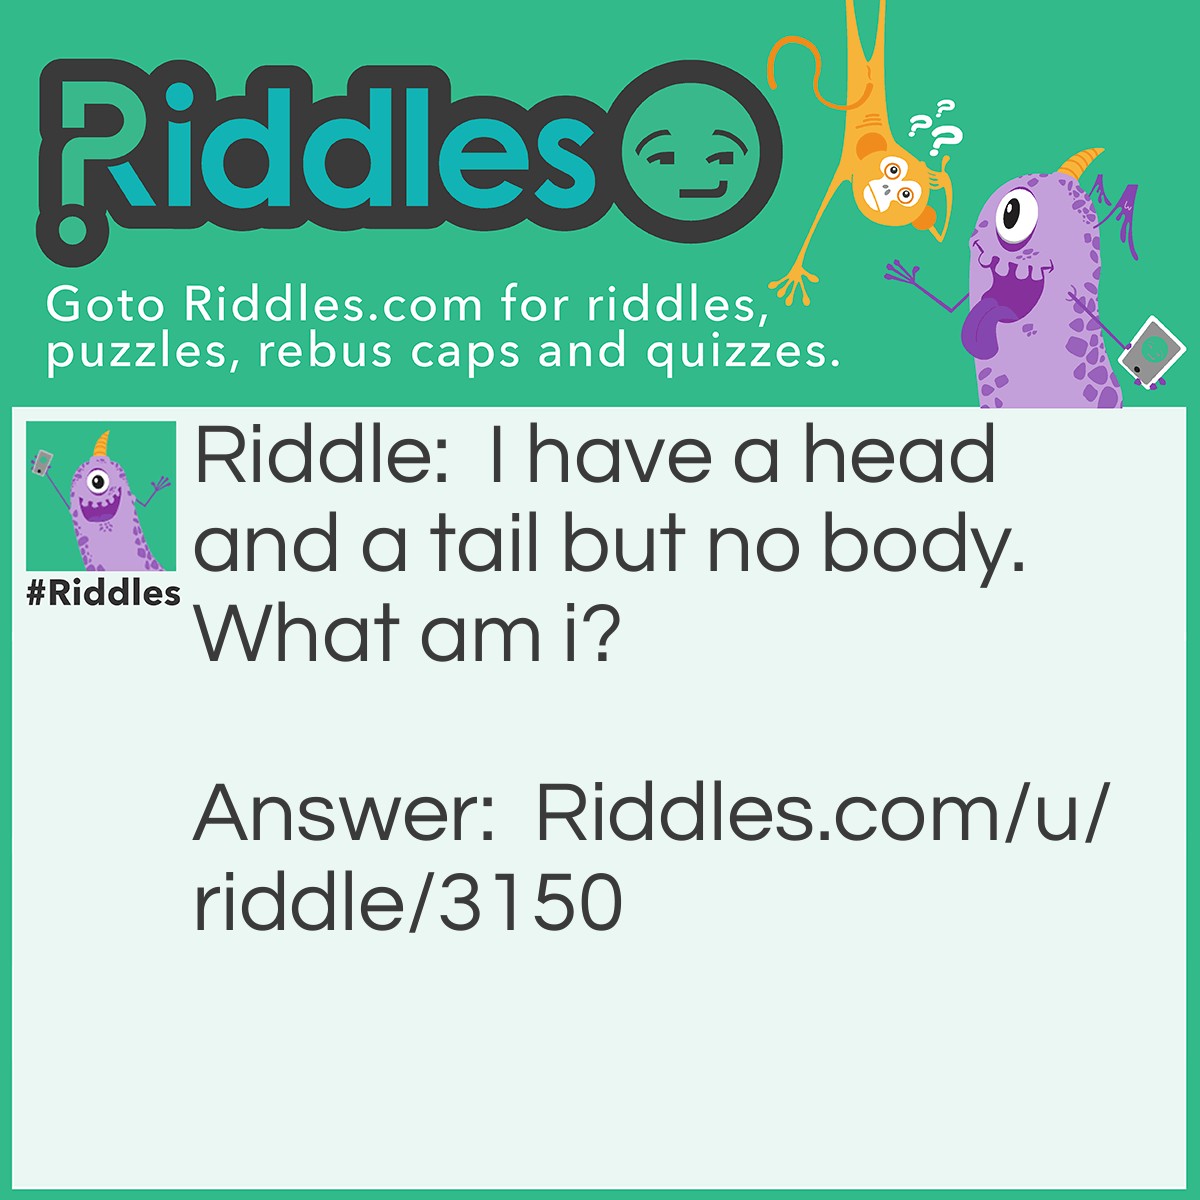 Riddle: I have a head and a tail but no body. What am I? Answer: A coin!